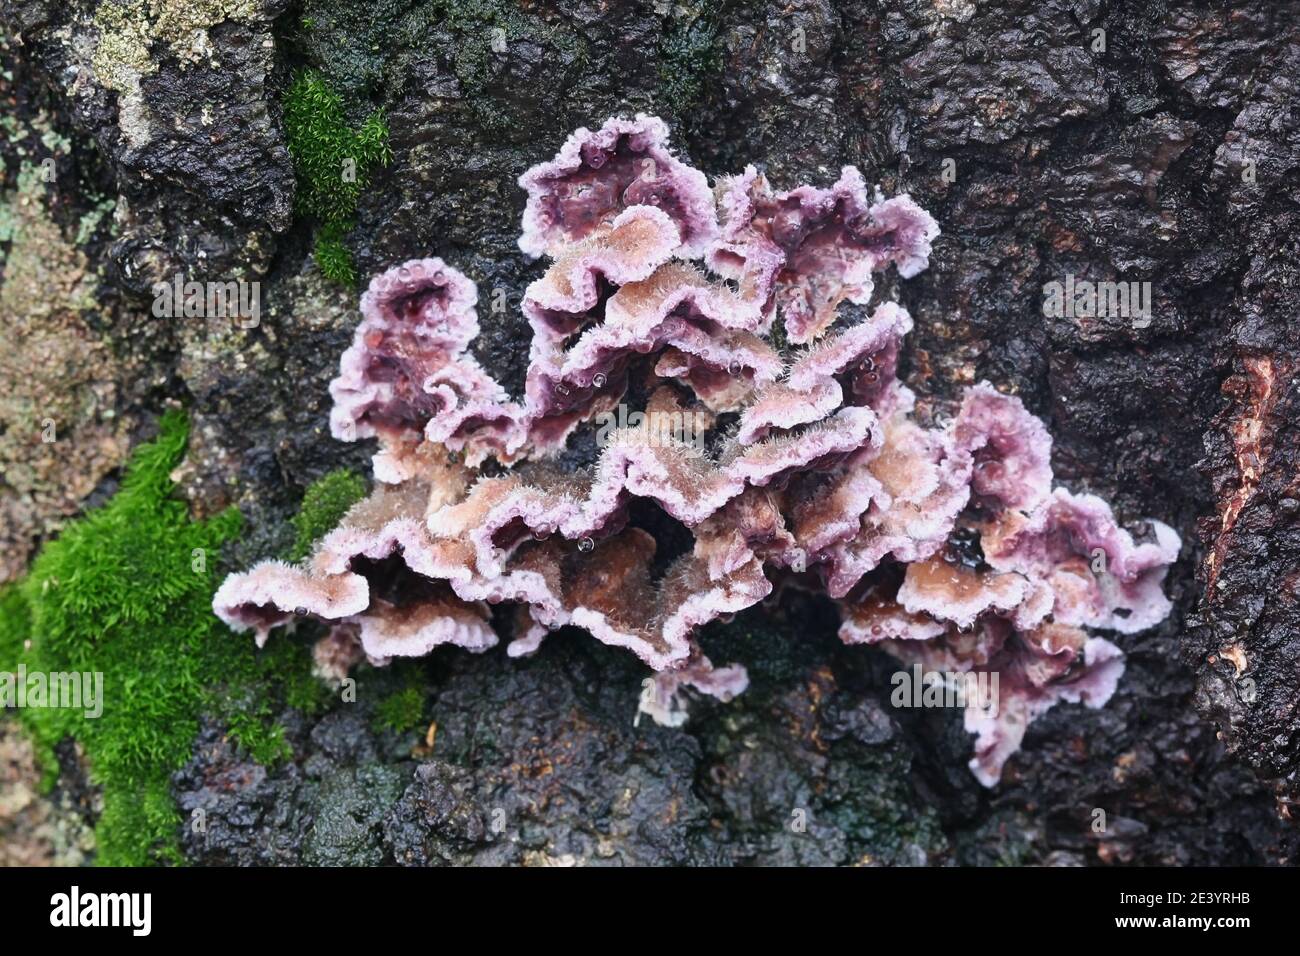 Chondrostereum purpureum, commonly known as the silverleaf fungus, used as a biological control agent for stump sprouting Stock Photo